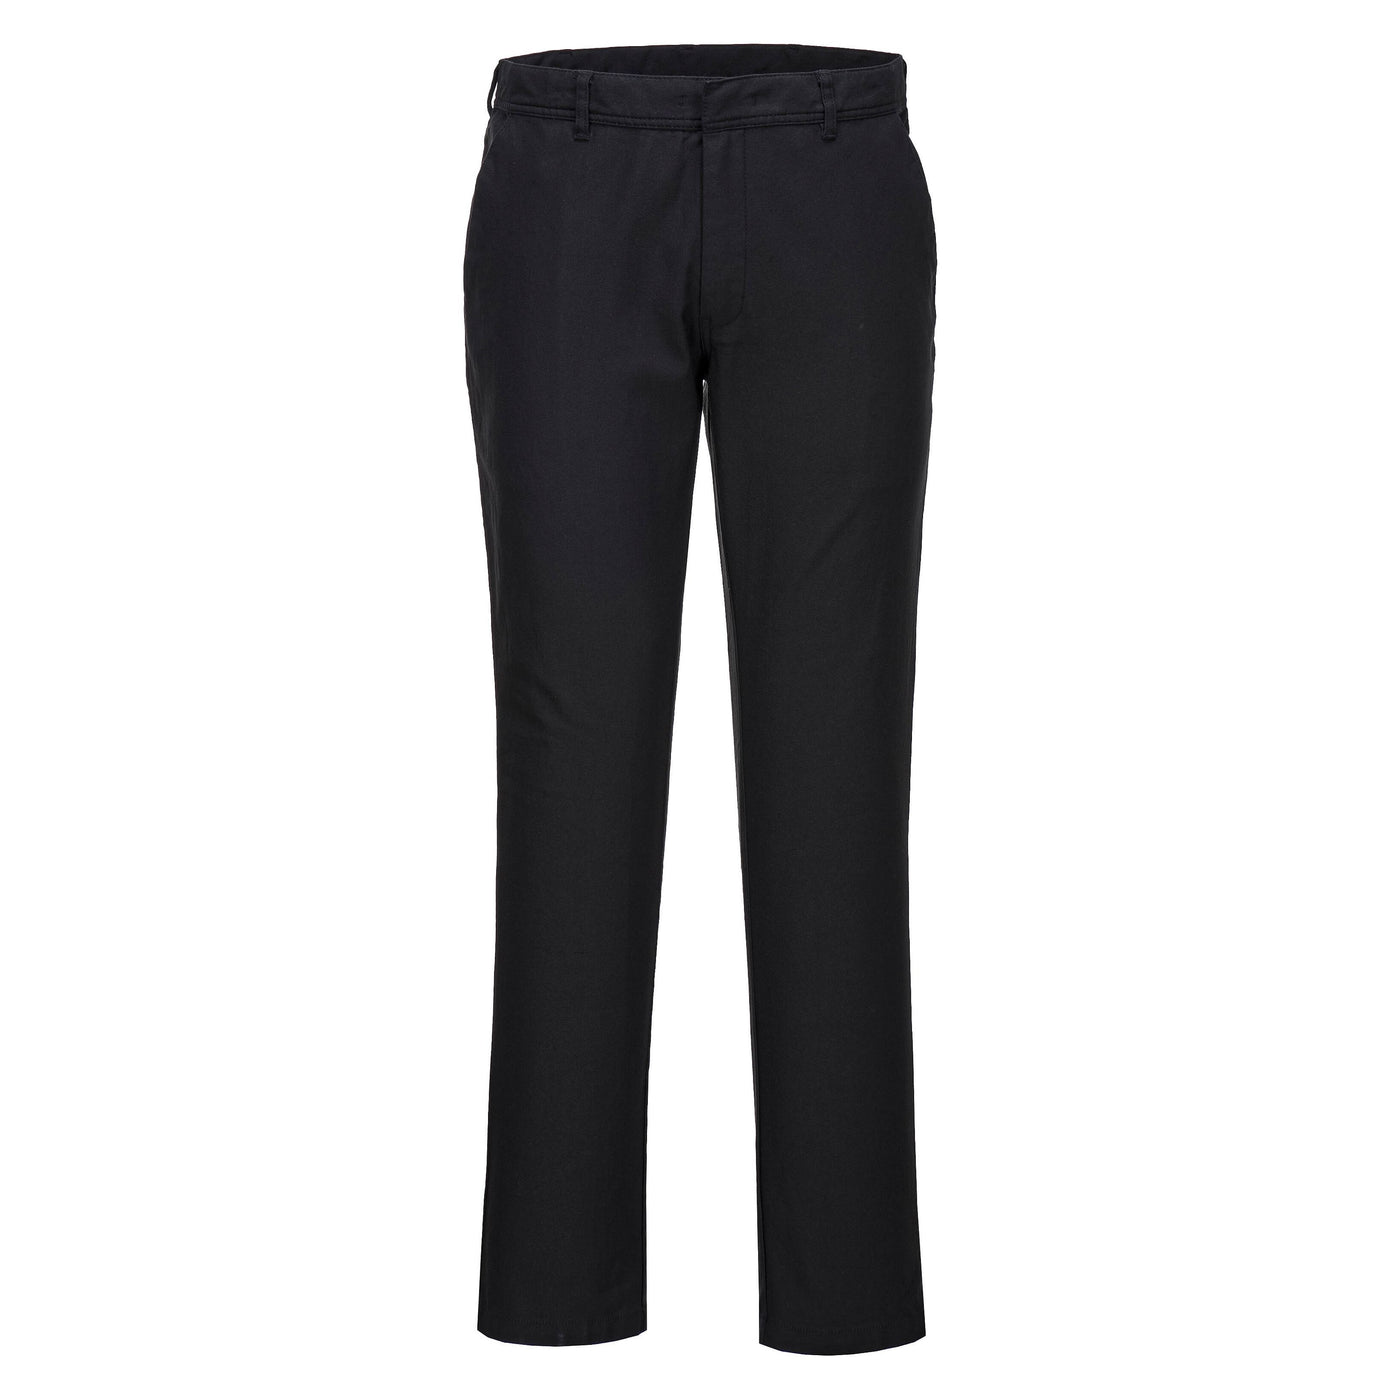 Portwest S235 Womens Slim Chino Trousers